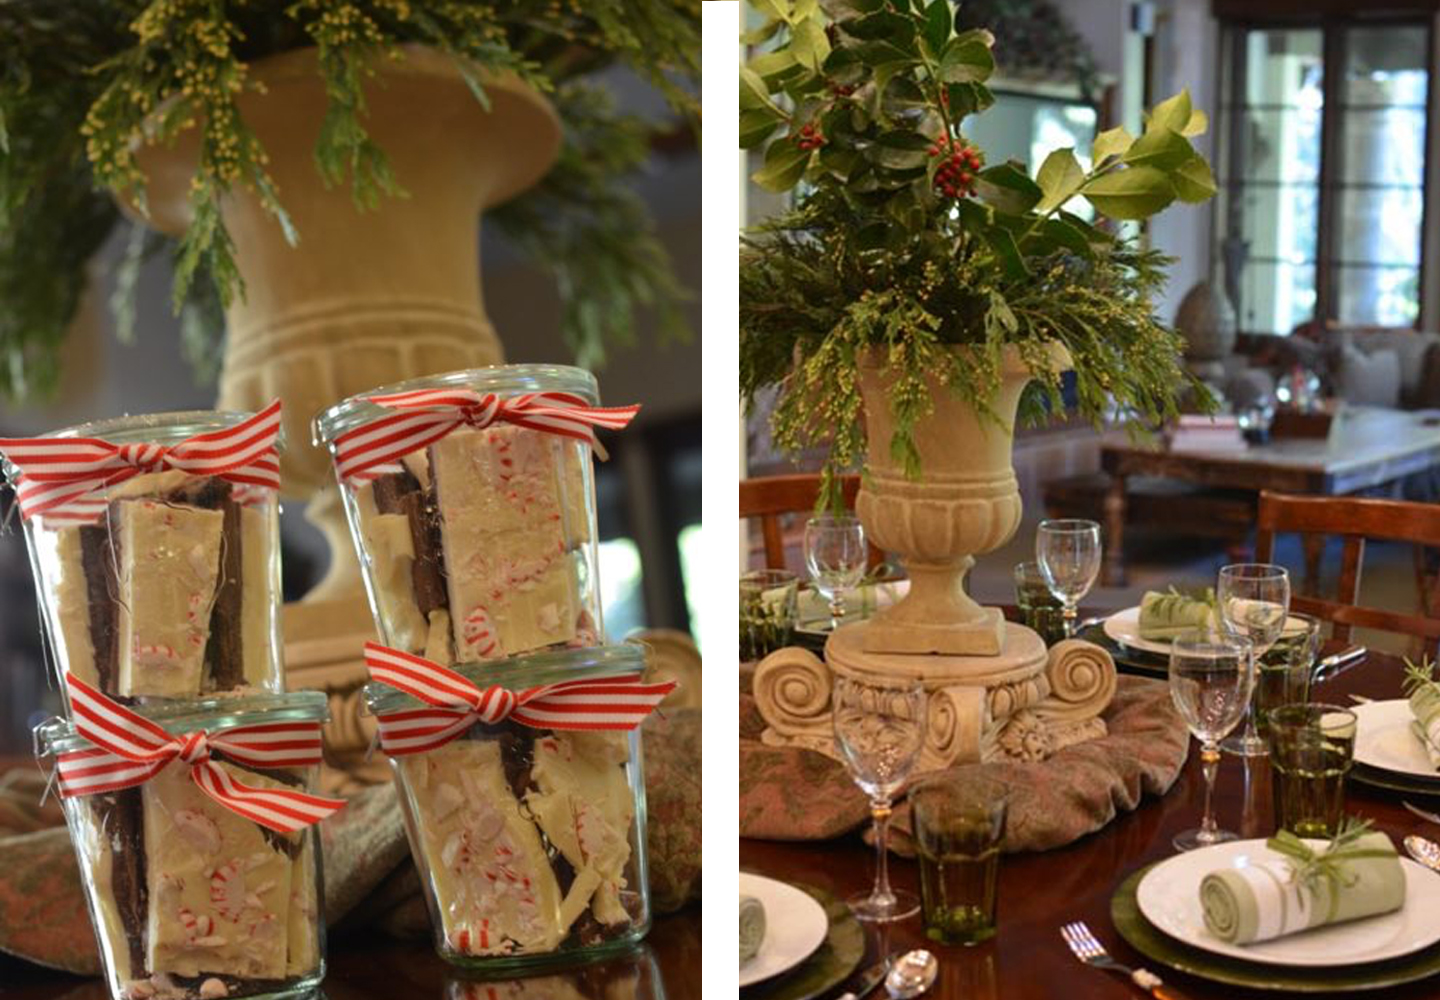 Simple table decor with a few holiday accents. 